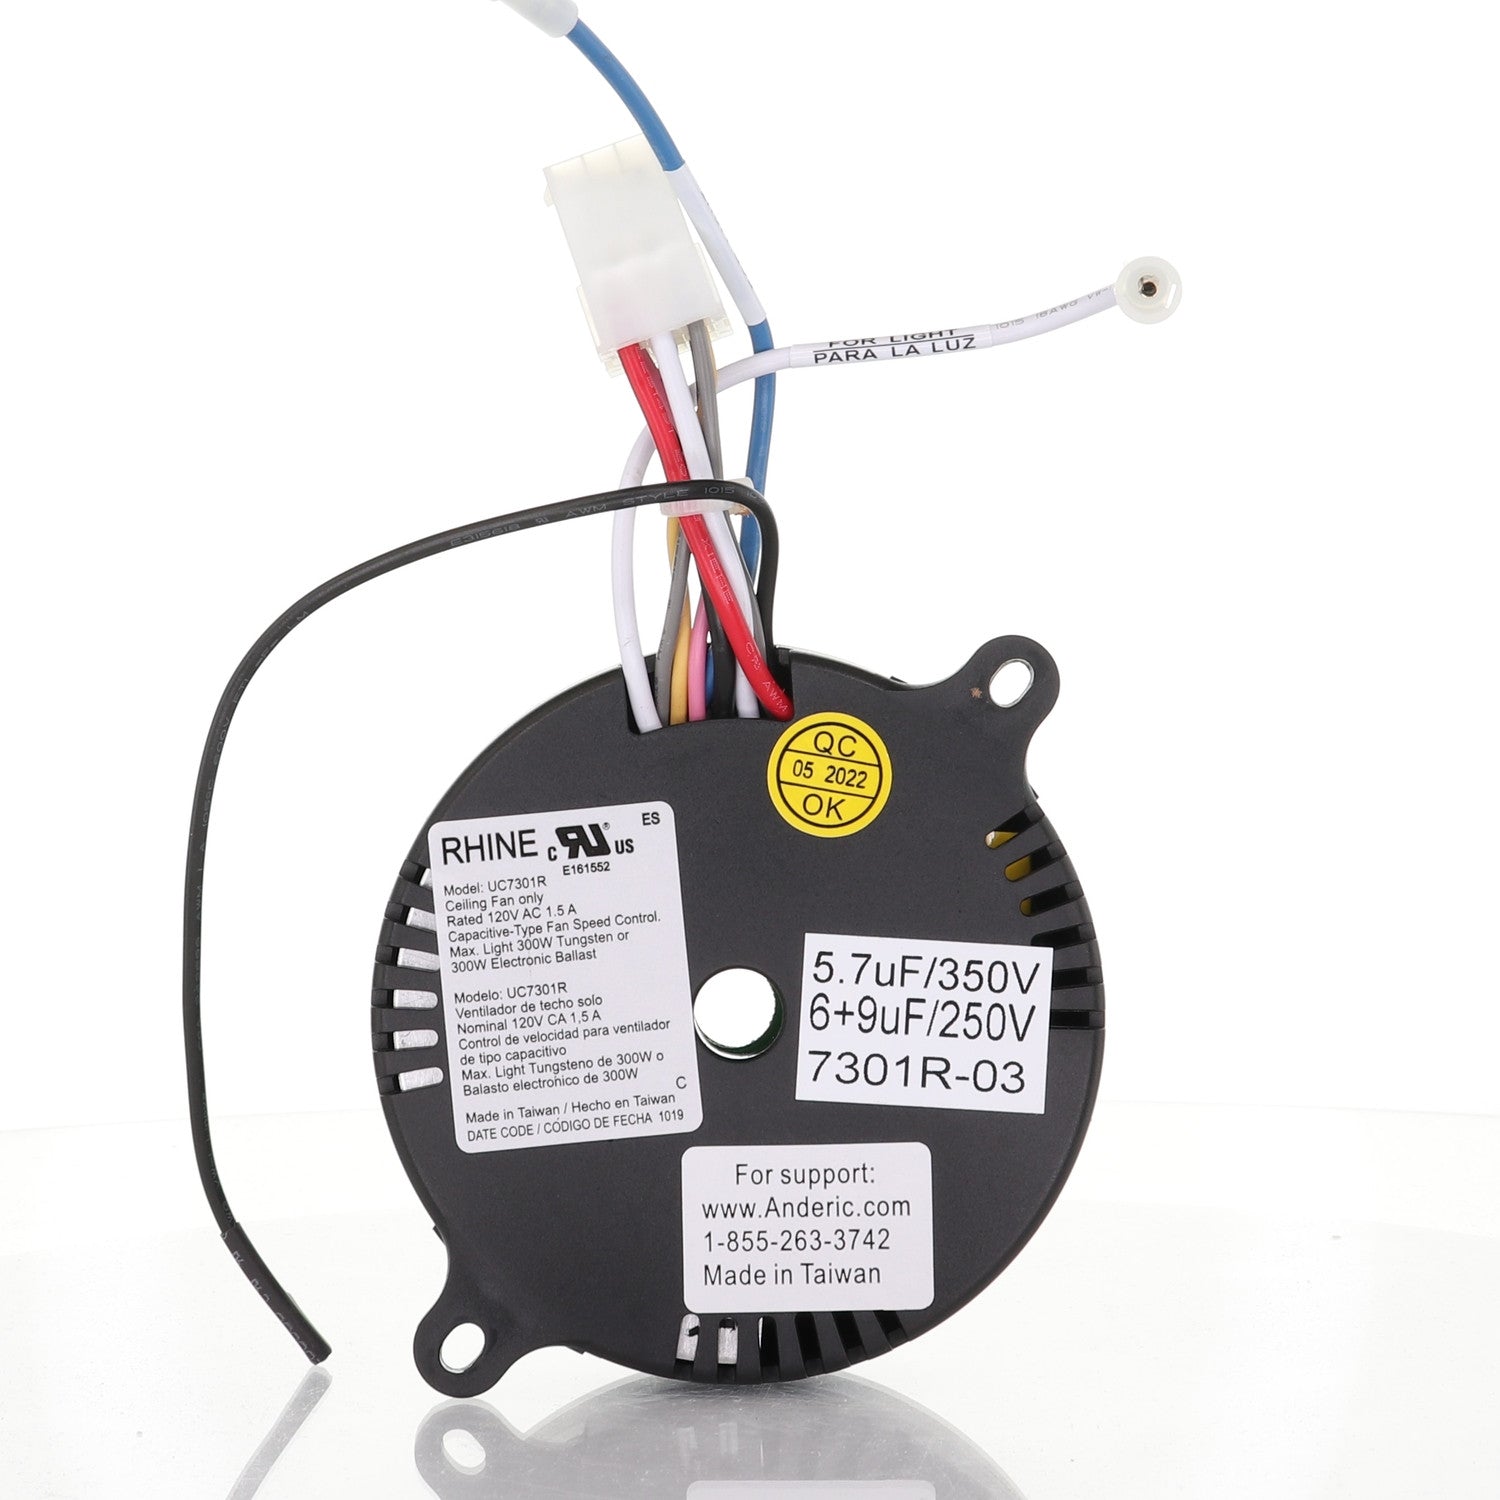 MR7703 (UC7301R-03, MR77A) Replacement Ceiling Fan Receiver for Altura Ceiling Fans